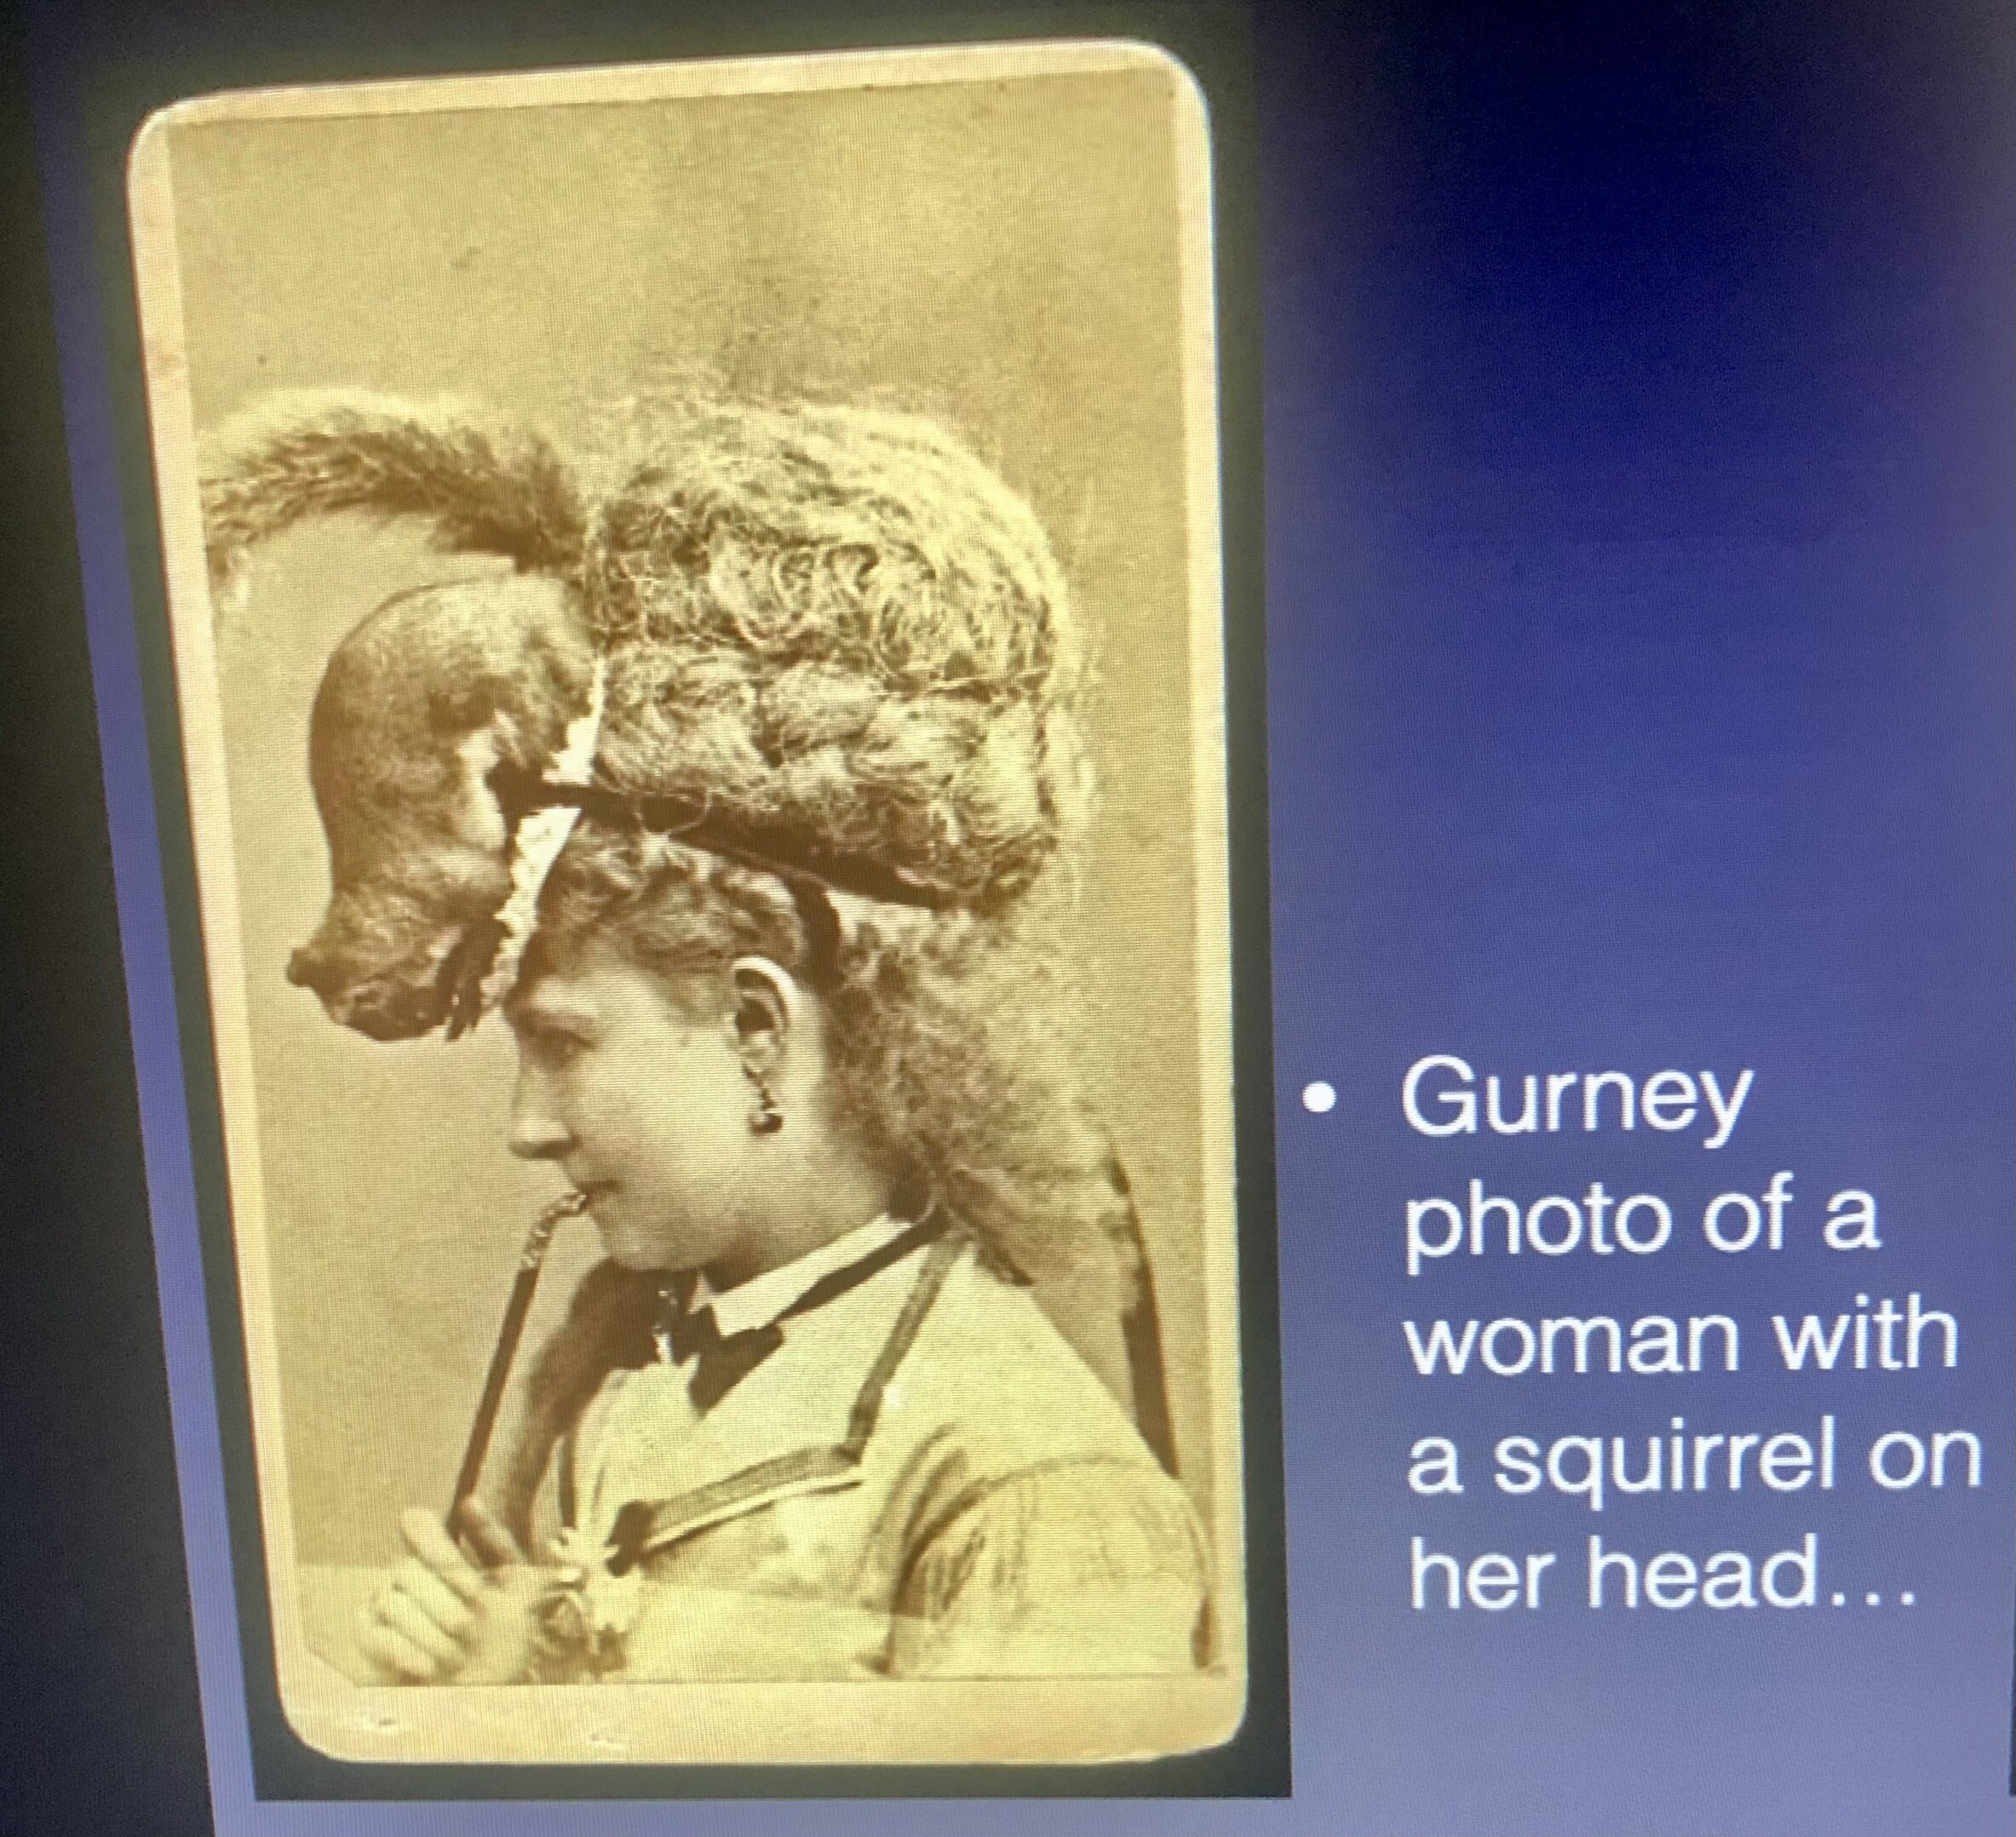 From a MASNYC presentation on the Golden Age of Photography.  